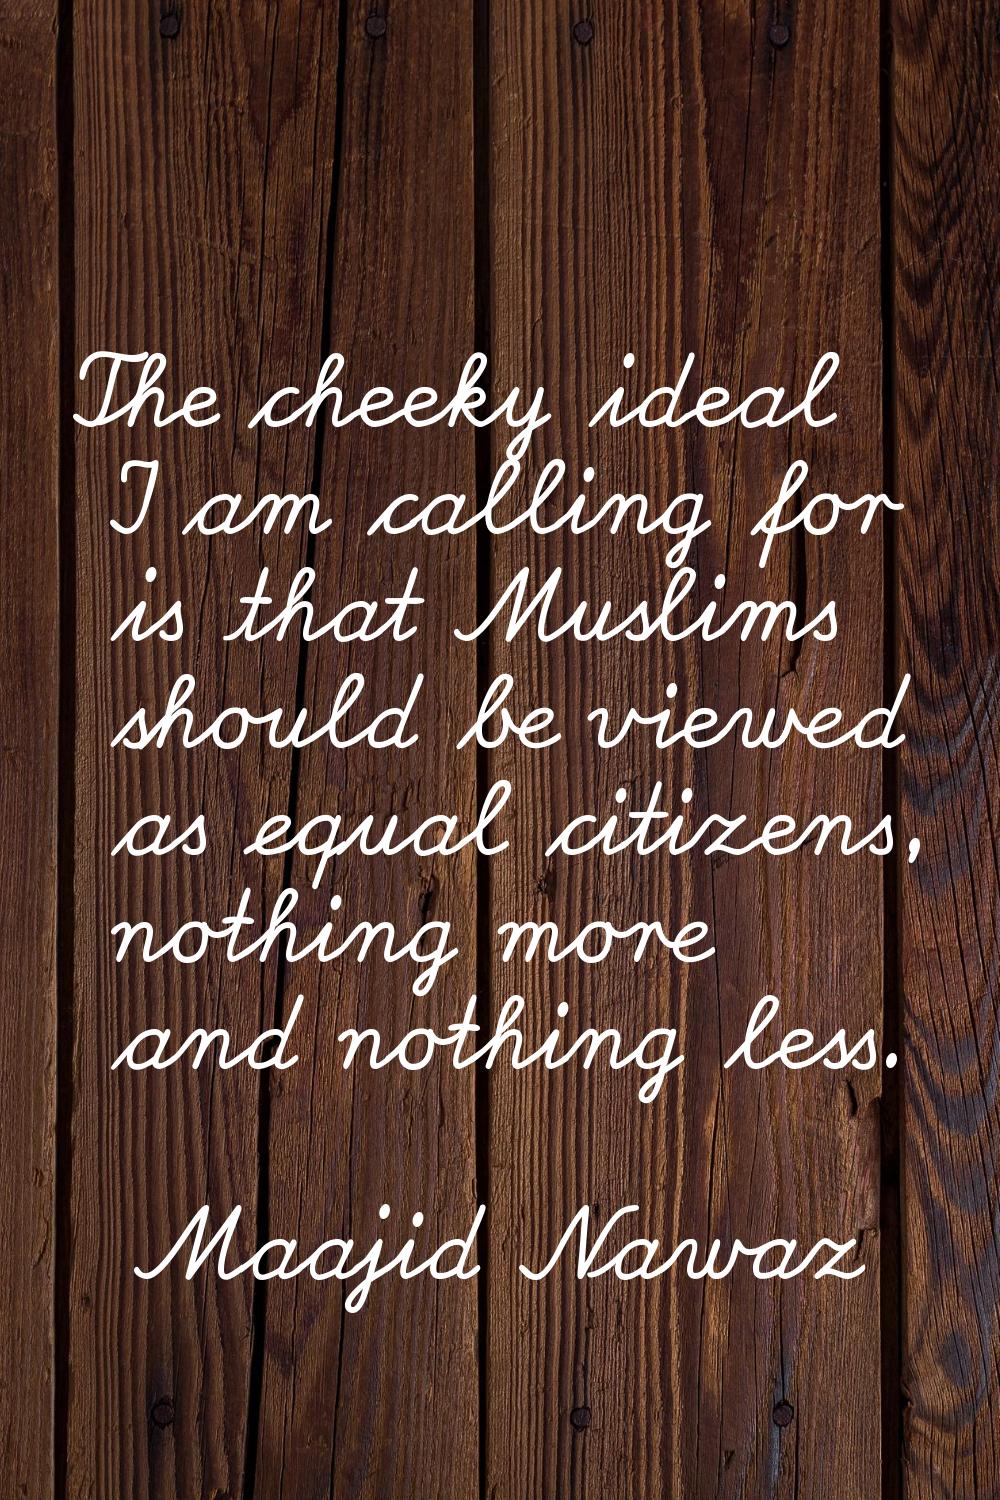 The cheeky ideal I am calling for is that Muslims should be viewed as equal citizens, nothing more 